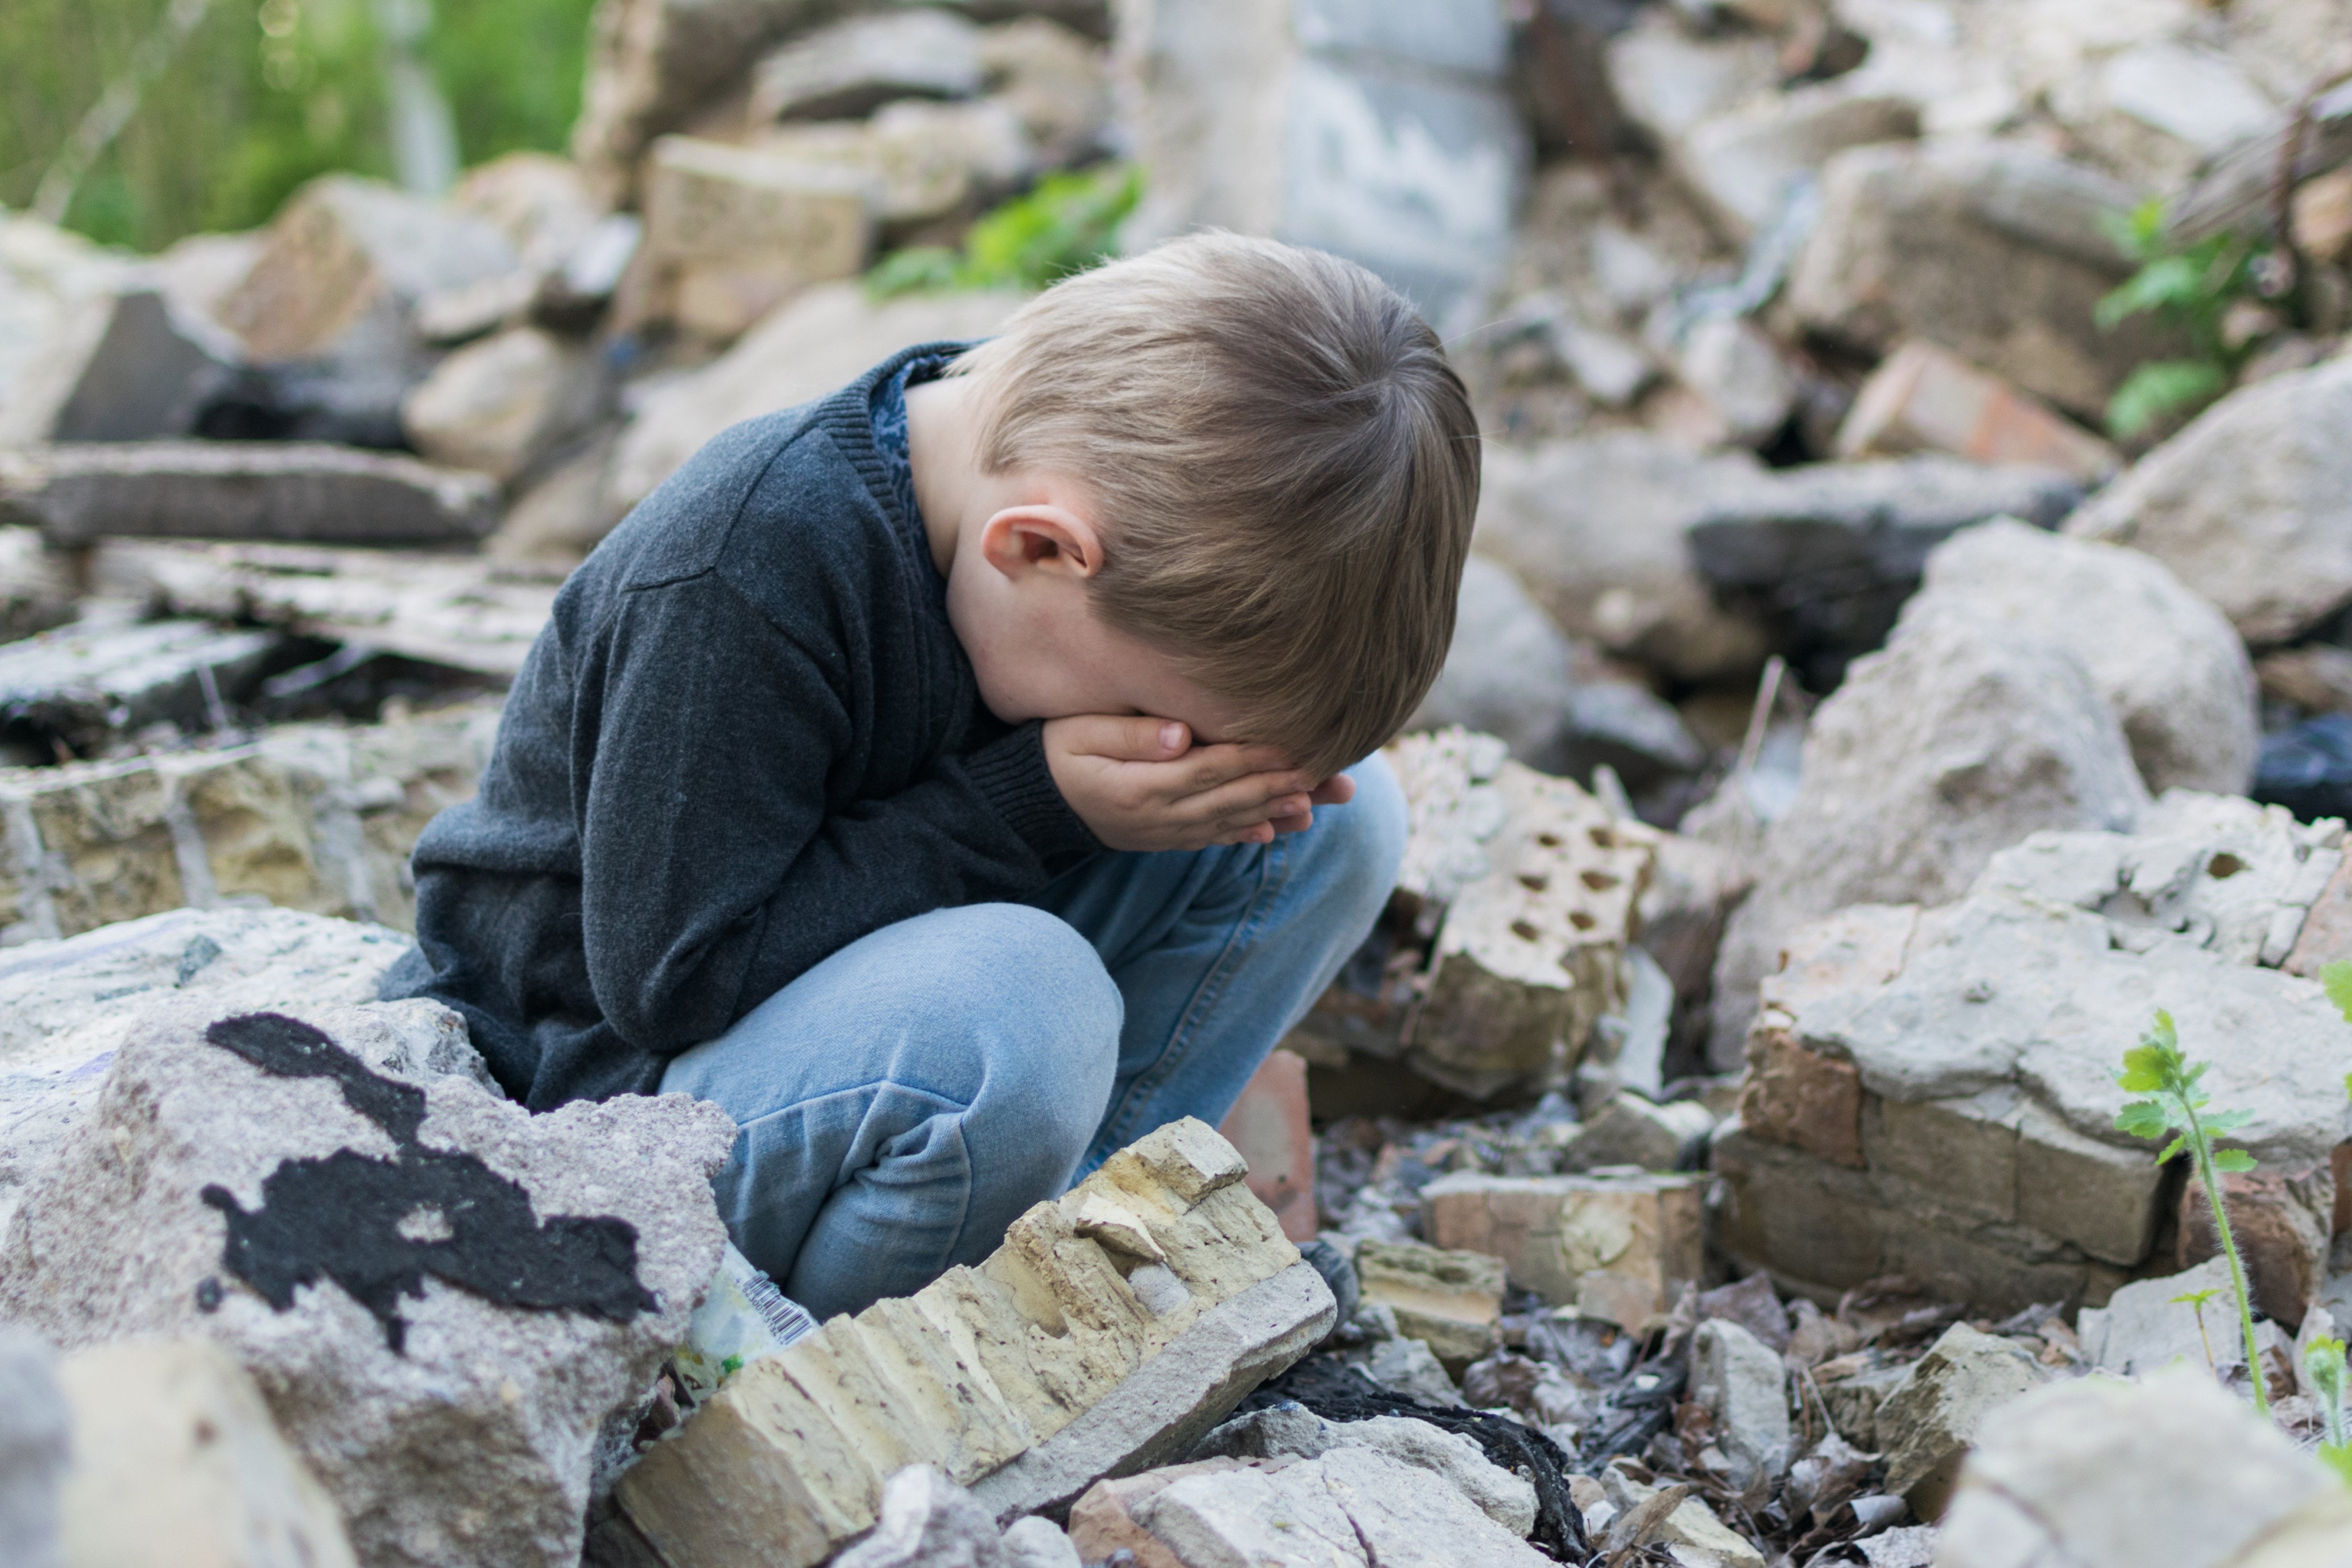 Trauma experienced in childhood, or parents’ trauma that impacted their behaviour towards their children, may leave an adult’s ‘inner child’ with unmet emotional needs.
Photo: Shutterstock
